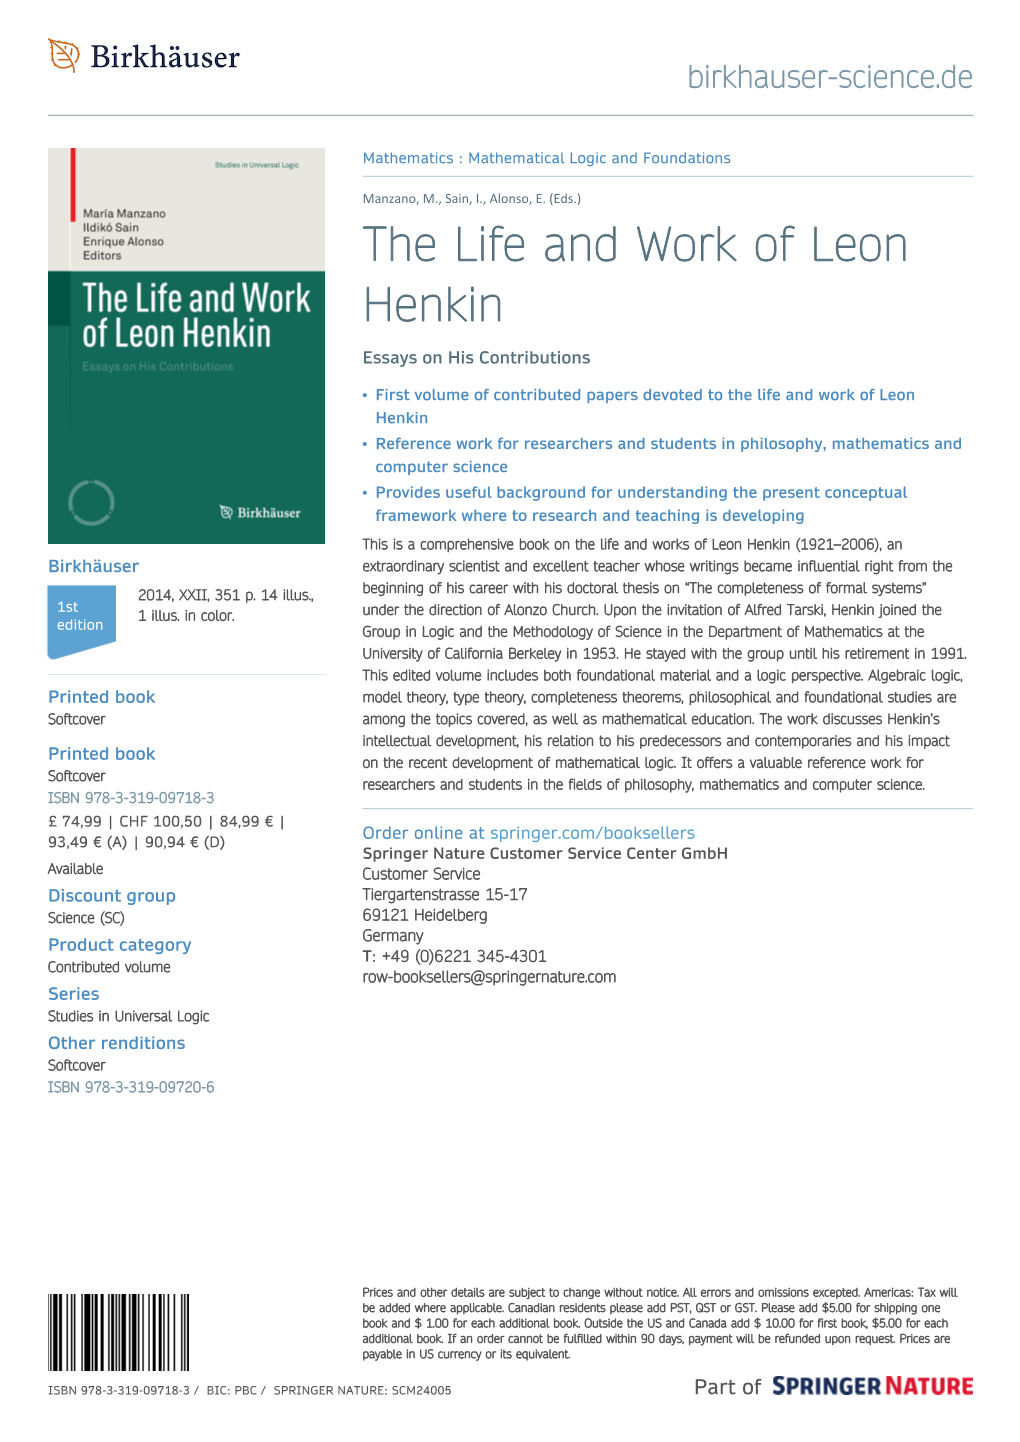 The Life and Work of Leon Henkin Essays on His Contributions